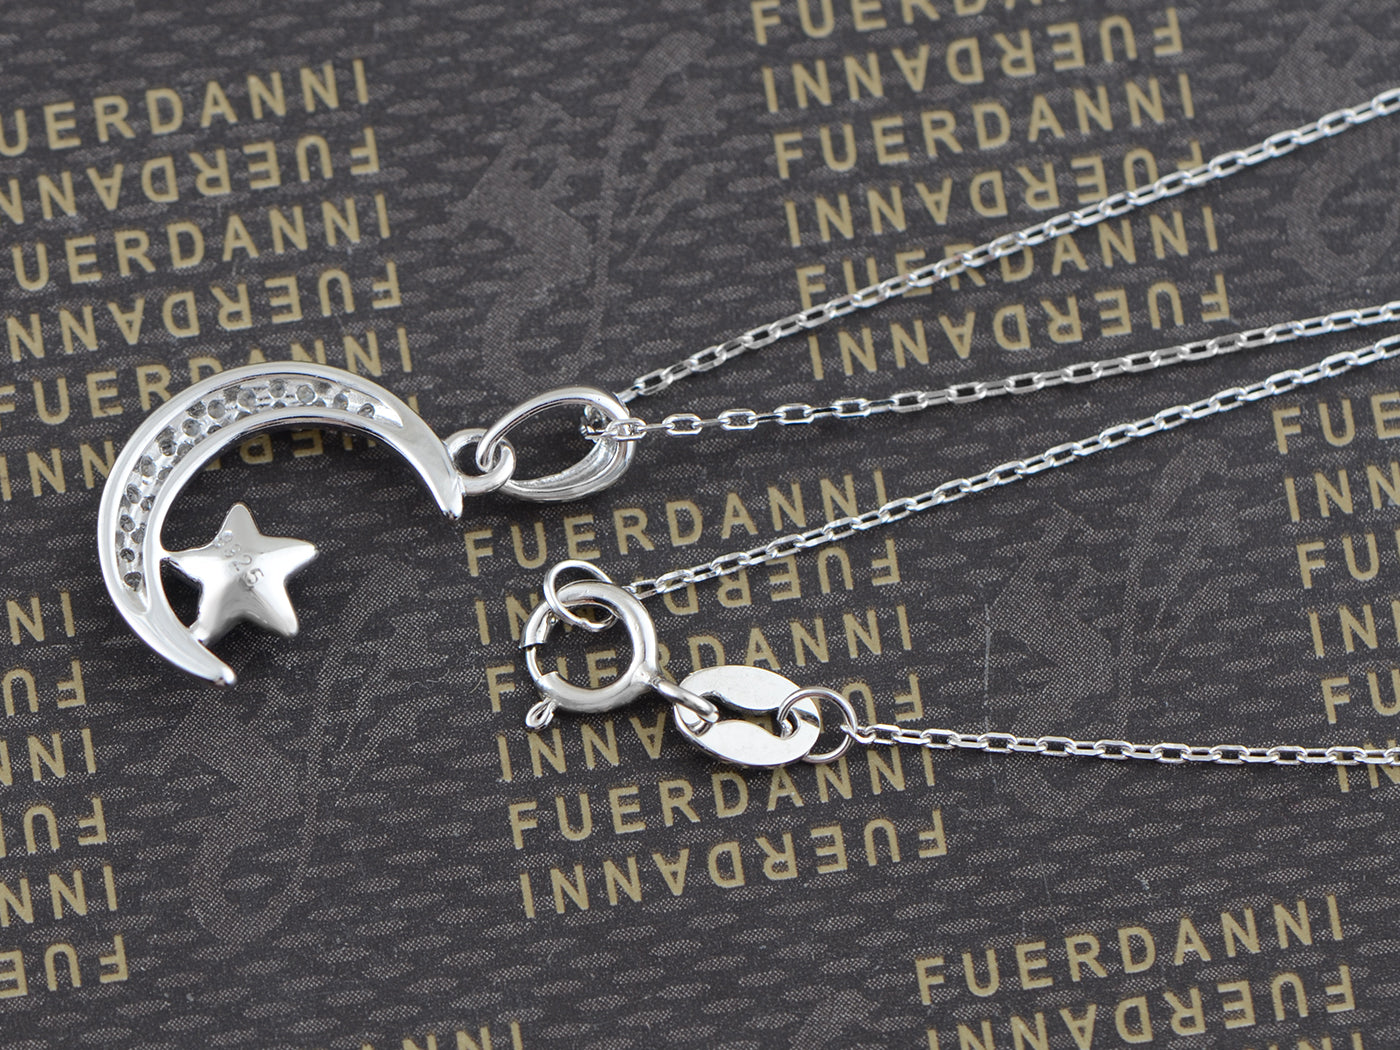 Crescent Moon Star Silver 925 Chain Blue Elements Necklace